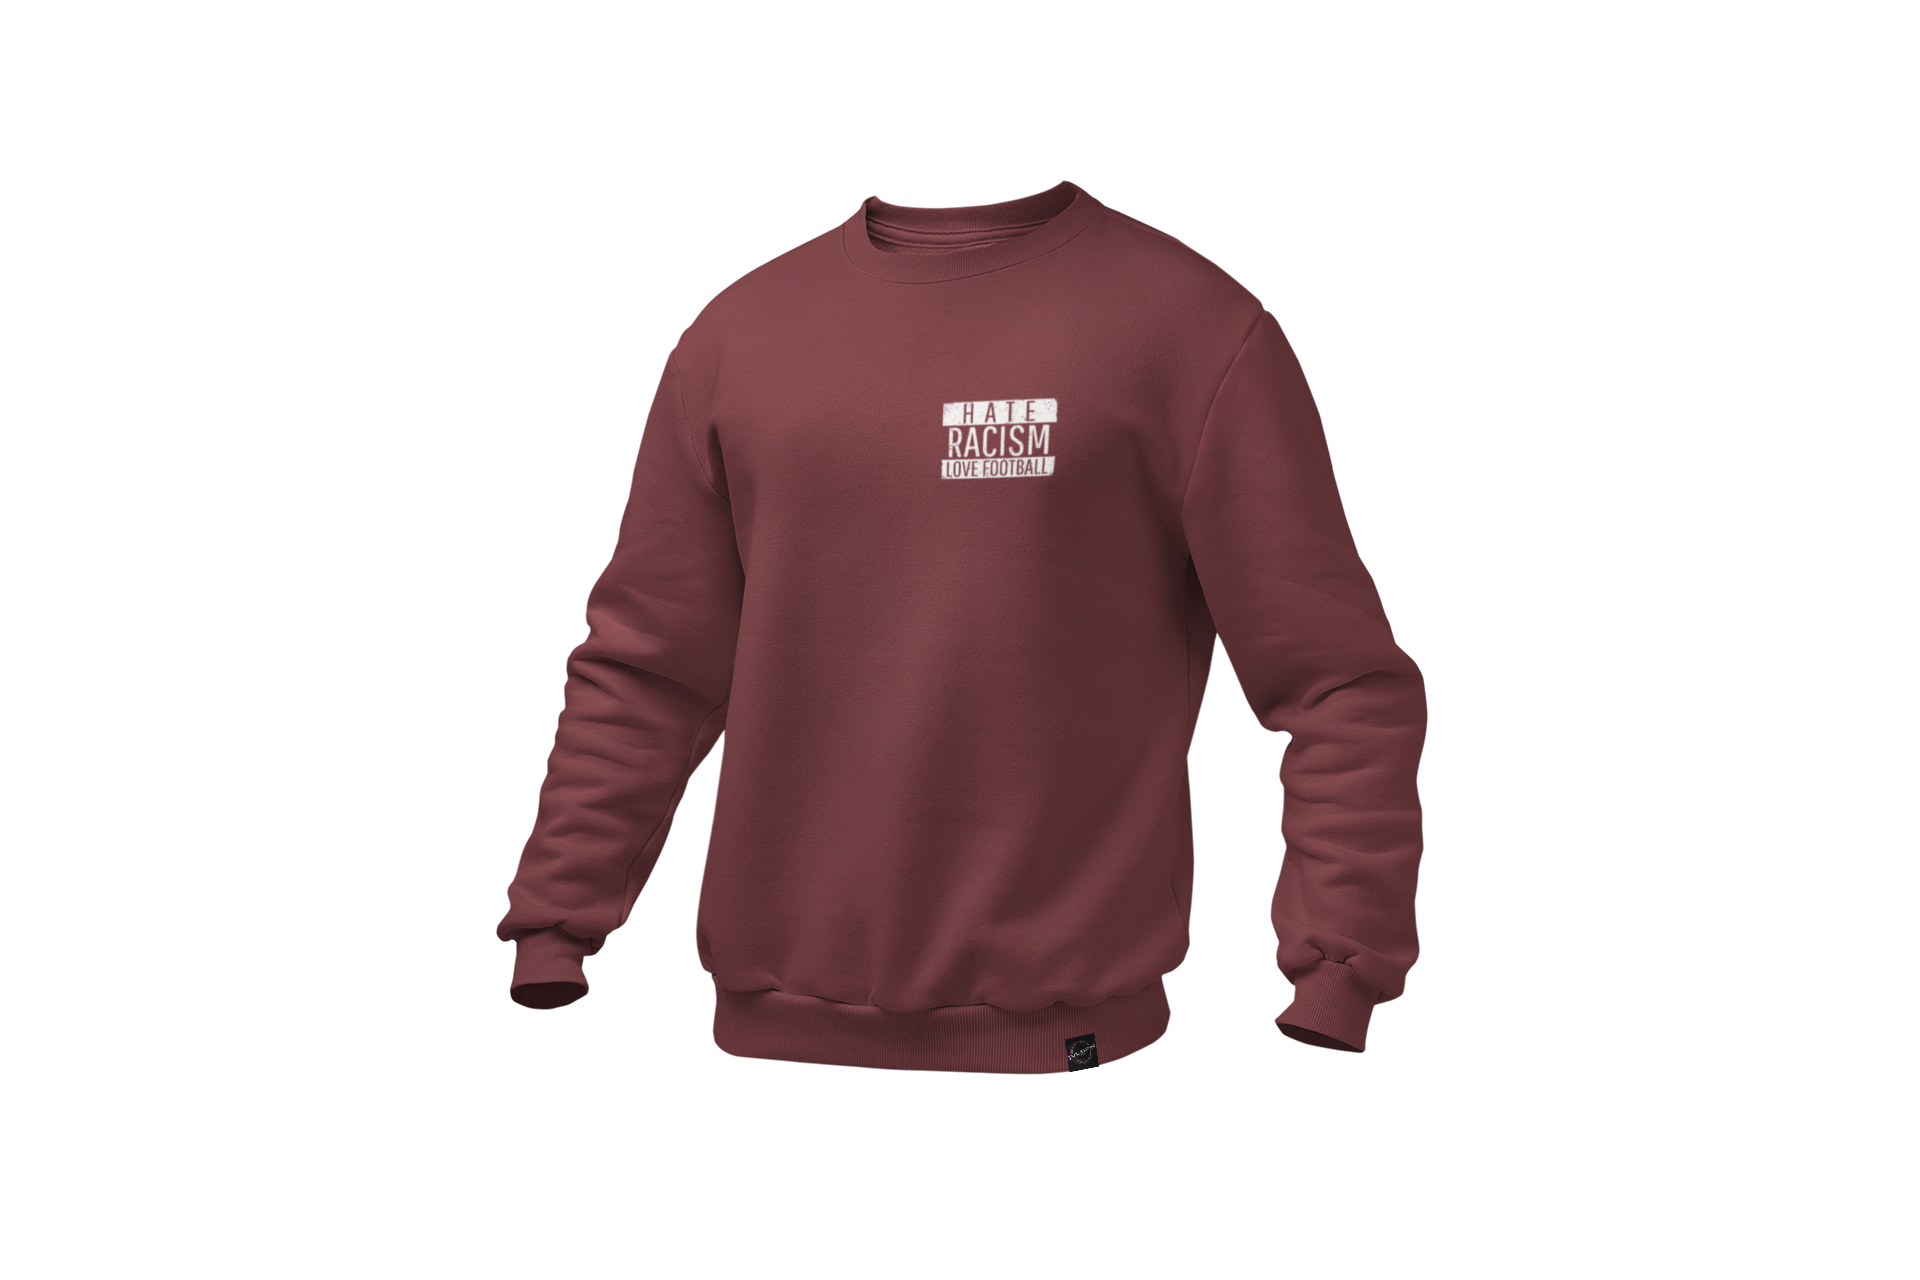 mockup-of-a-ghosted-crewneck-sweatshirt-over-a-solid-background-26960 (48).png